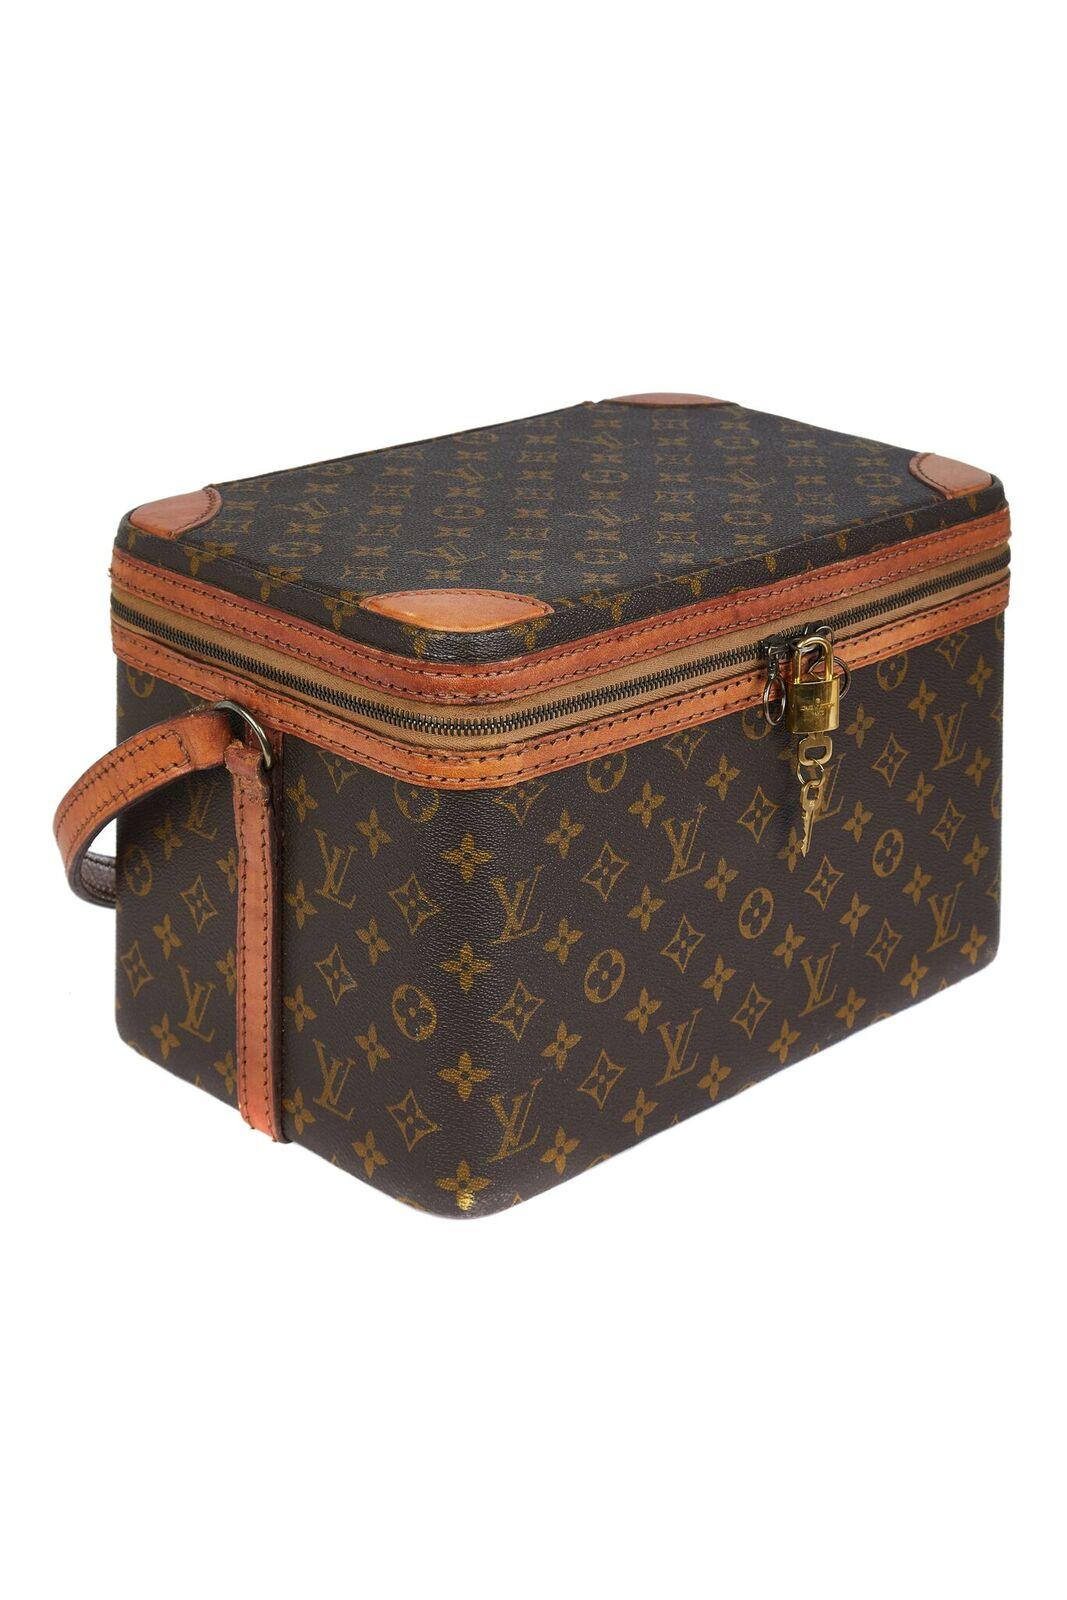 This 1960s Louis Vuitton train vanity case is a much coveted, collectable piece and naturally of exceptional quality. The carry on case is compact and as beautiful as it is robust, covered in the celebrated brand's signature canvas and reinforced on